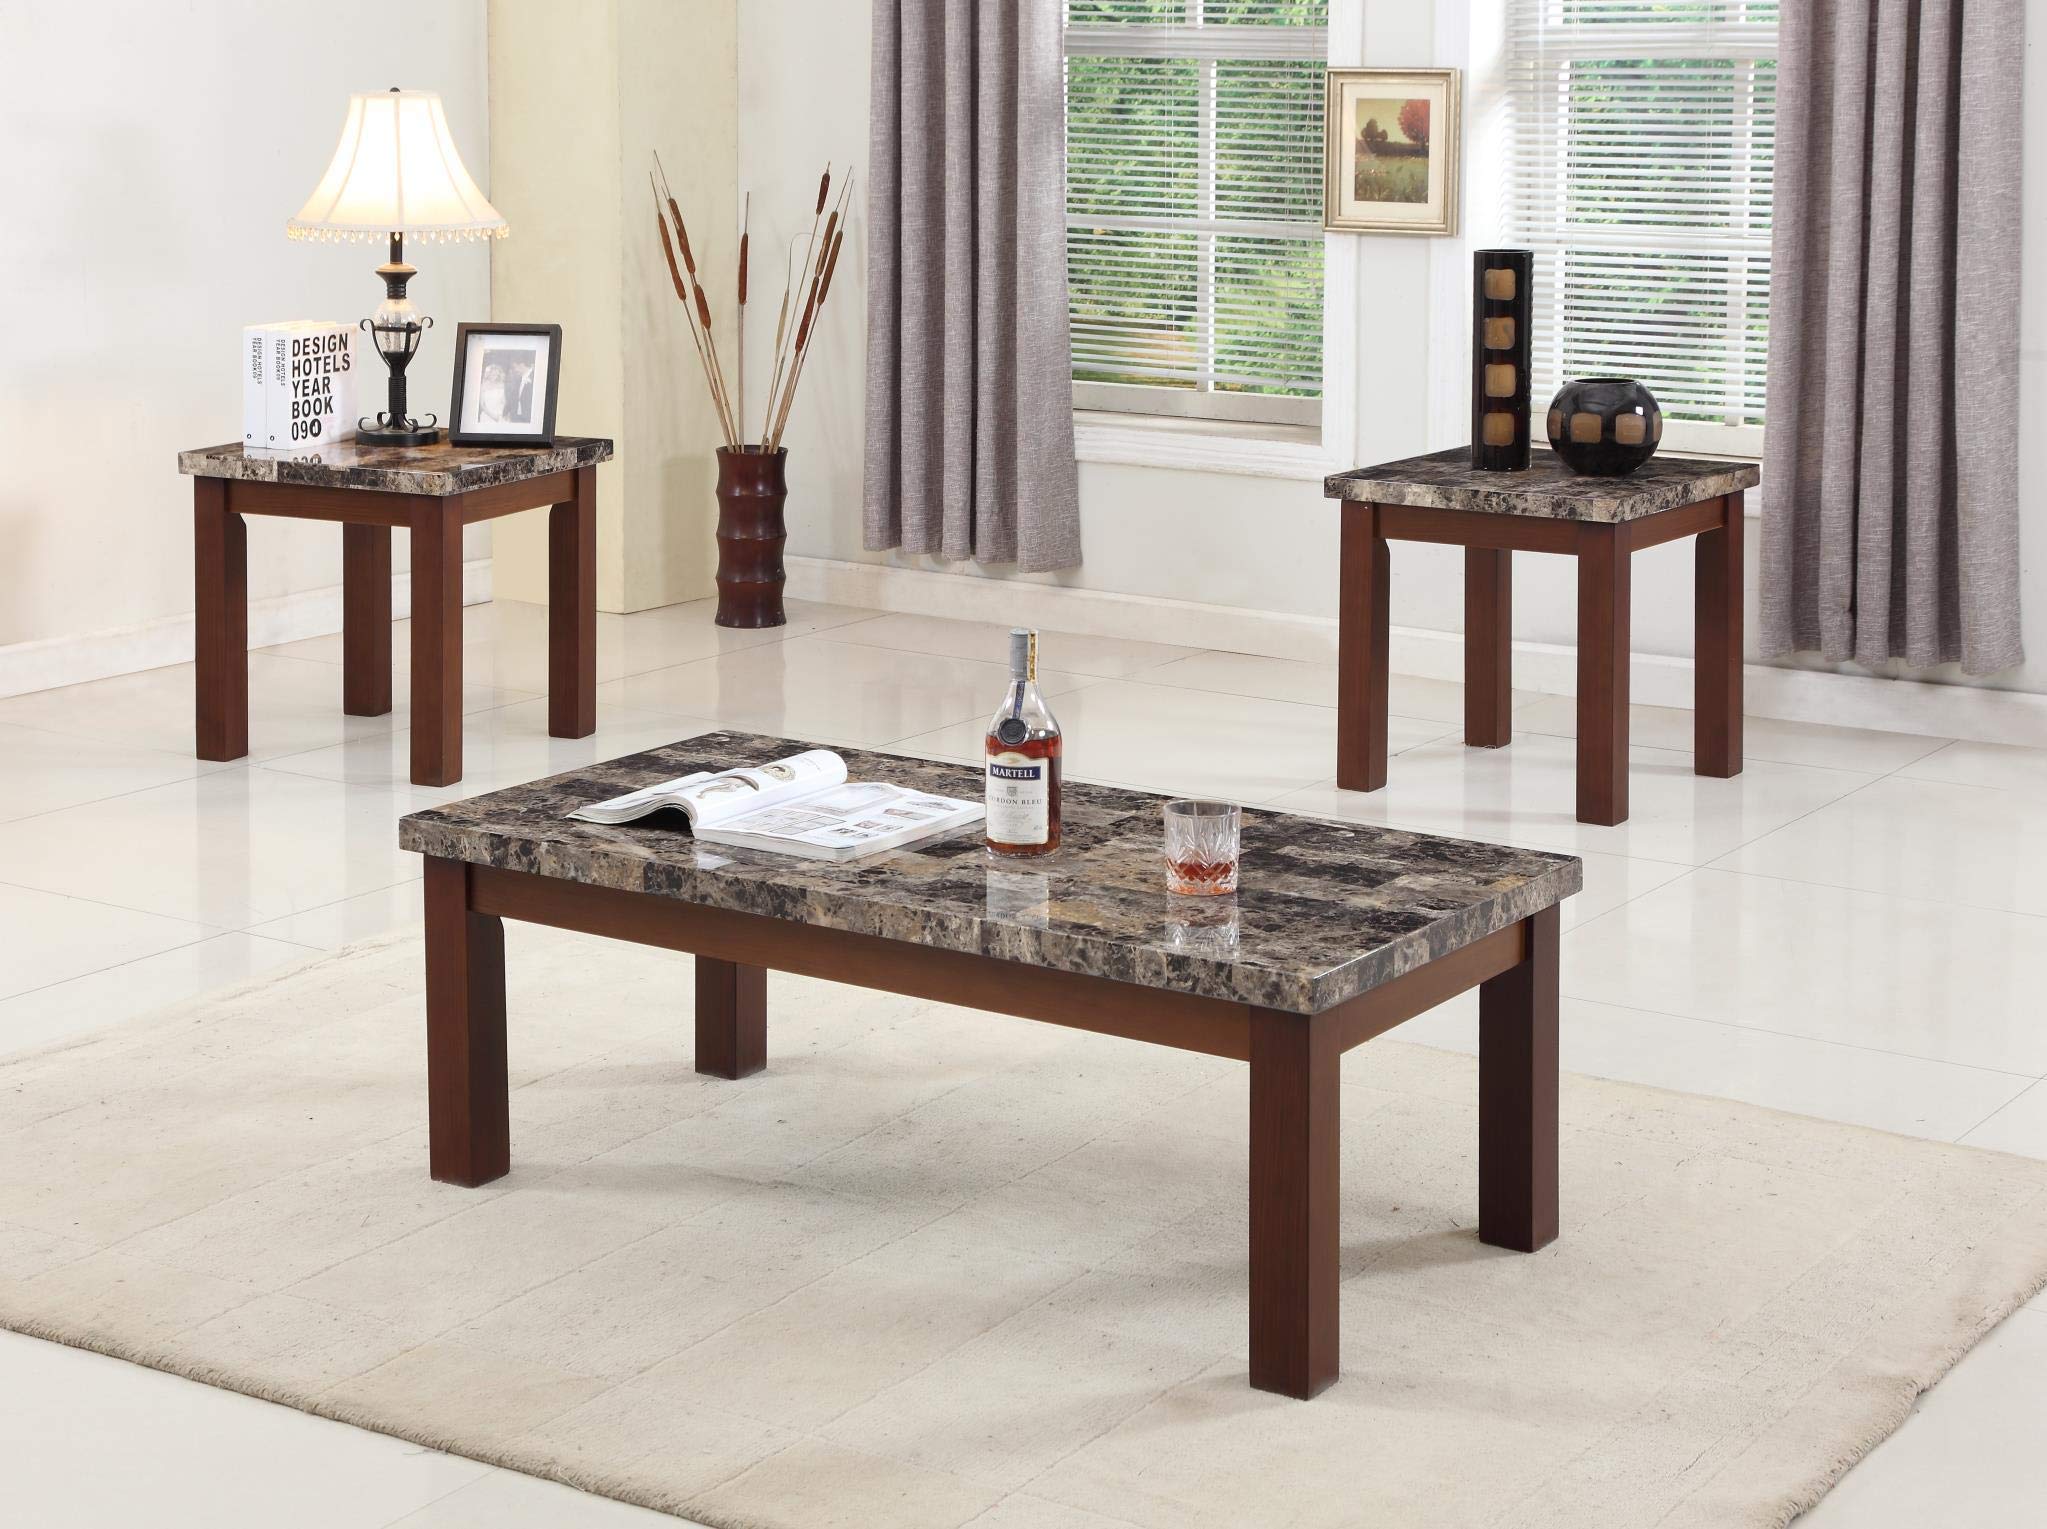 GTU Furniture Modern Contemporary Glam, 3-Piece Square Accent Table Set with 1 Coffee Table, and 2 End Tables in a Dark Brown Wood Finish Topped with Faux Marble, with Storage Shelf, Mesitas para Sala